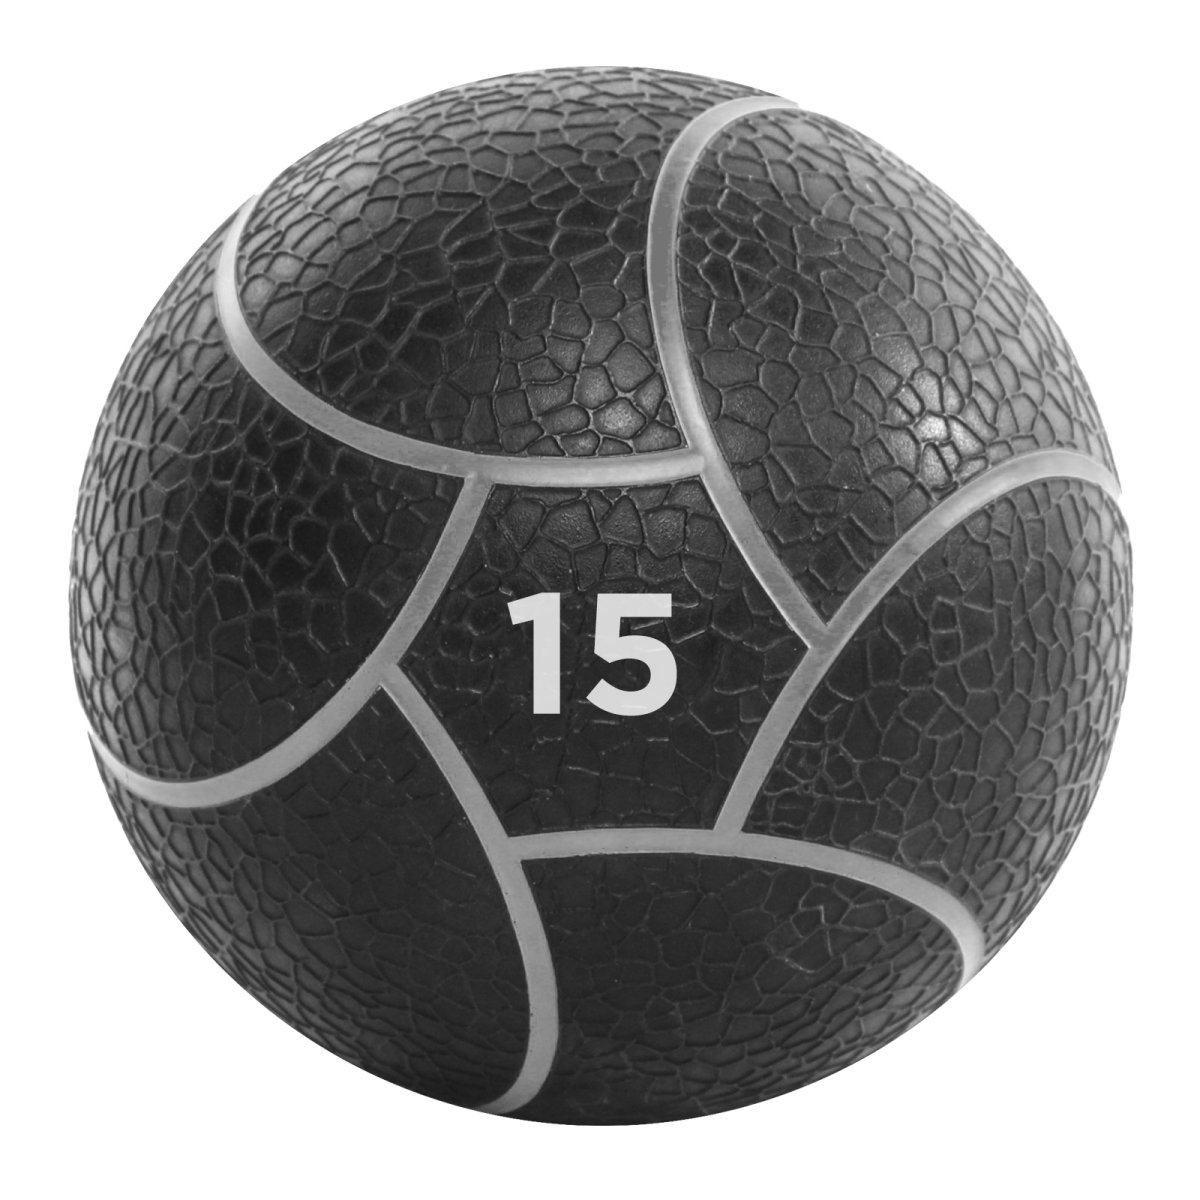 Picture of Power Systems 25715 Elite Power Med Ball Prime 15 lb. Gray